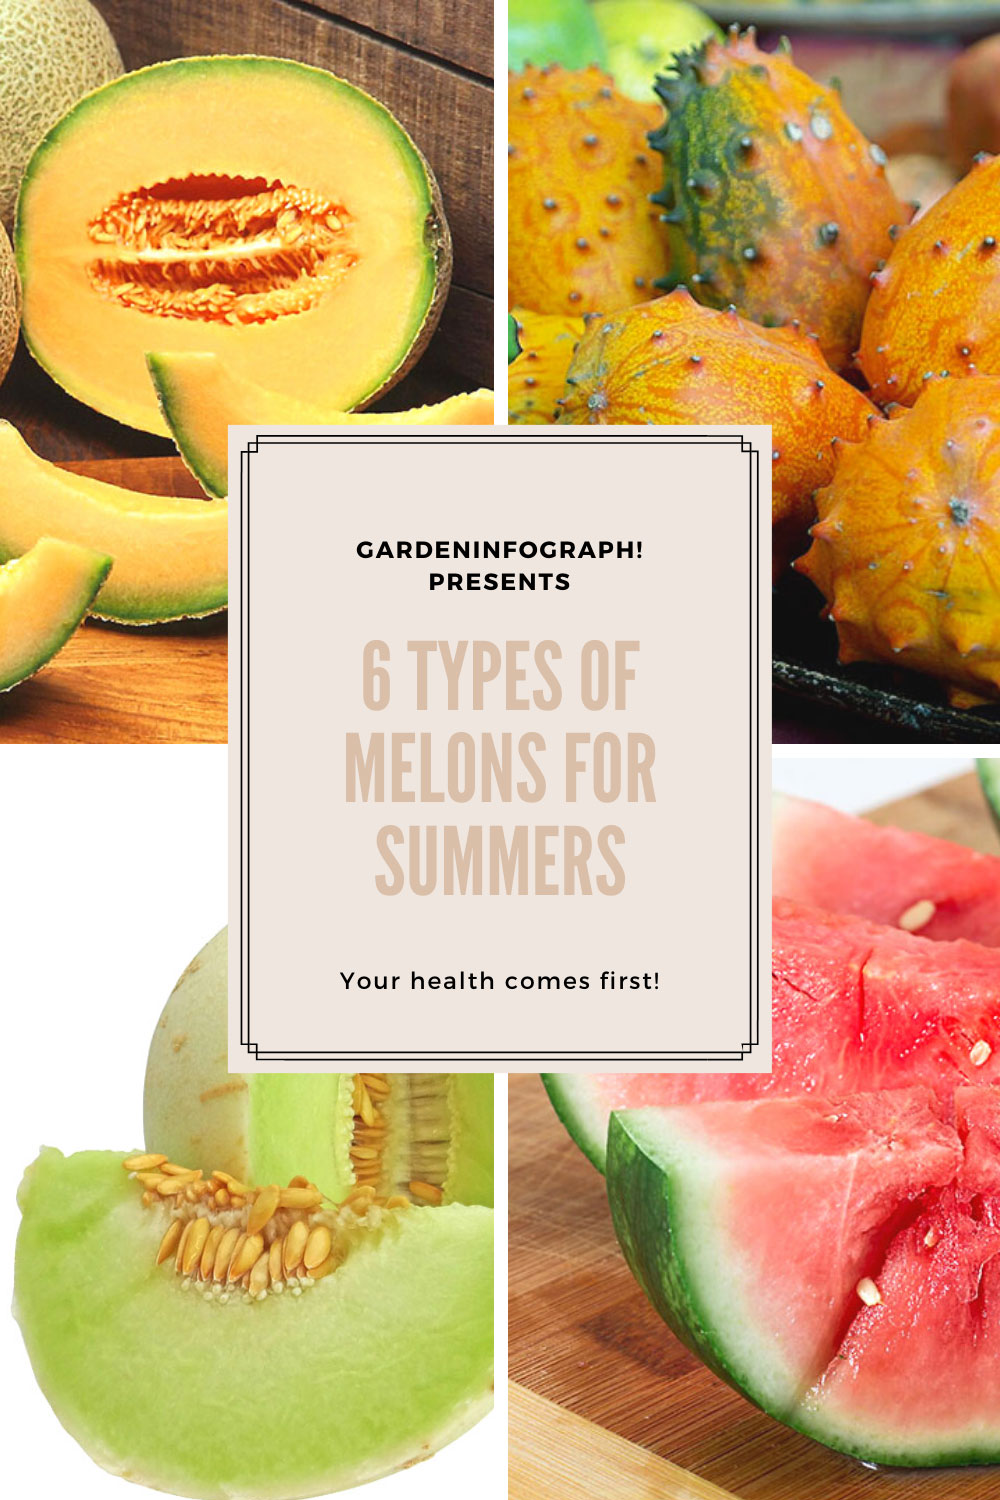 Melons for summers